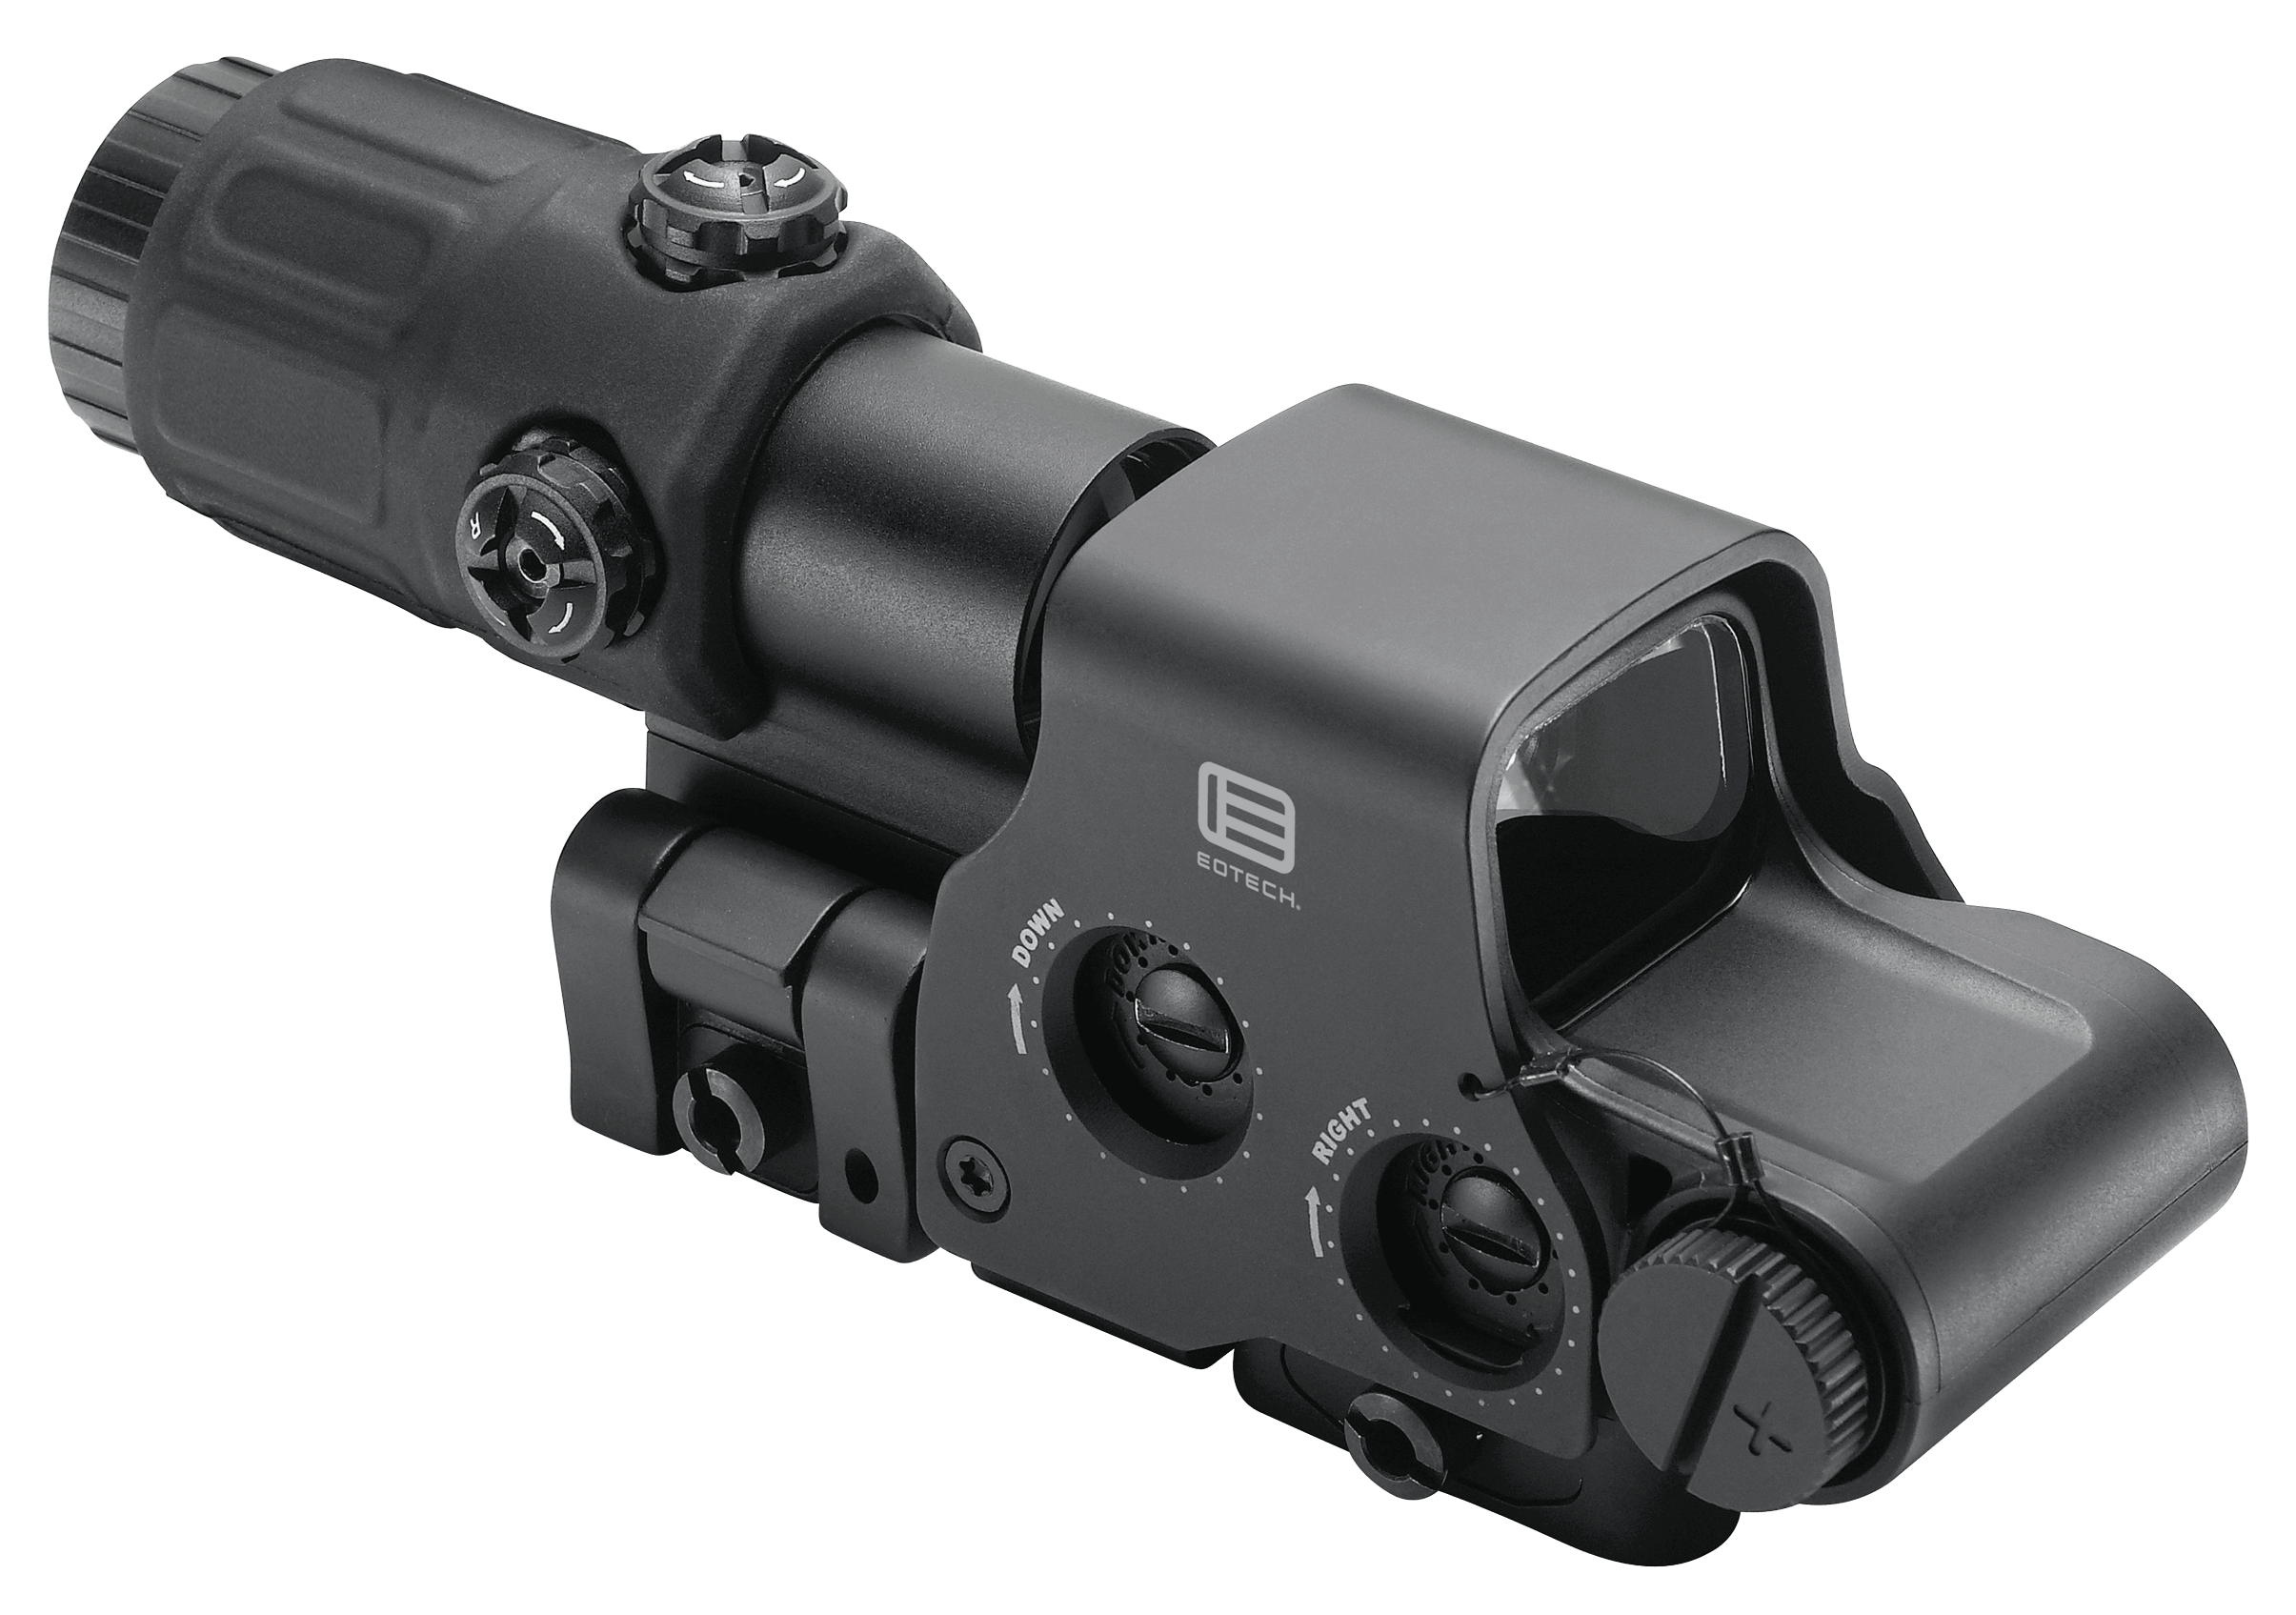 Eotech Hhsii Hhs Ii Exps2 And G33 Magnifier Black Anodized 1x 3x 1 Moa